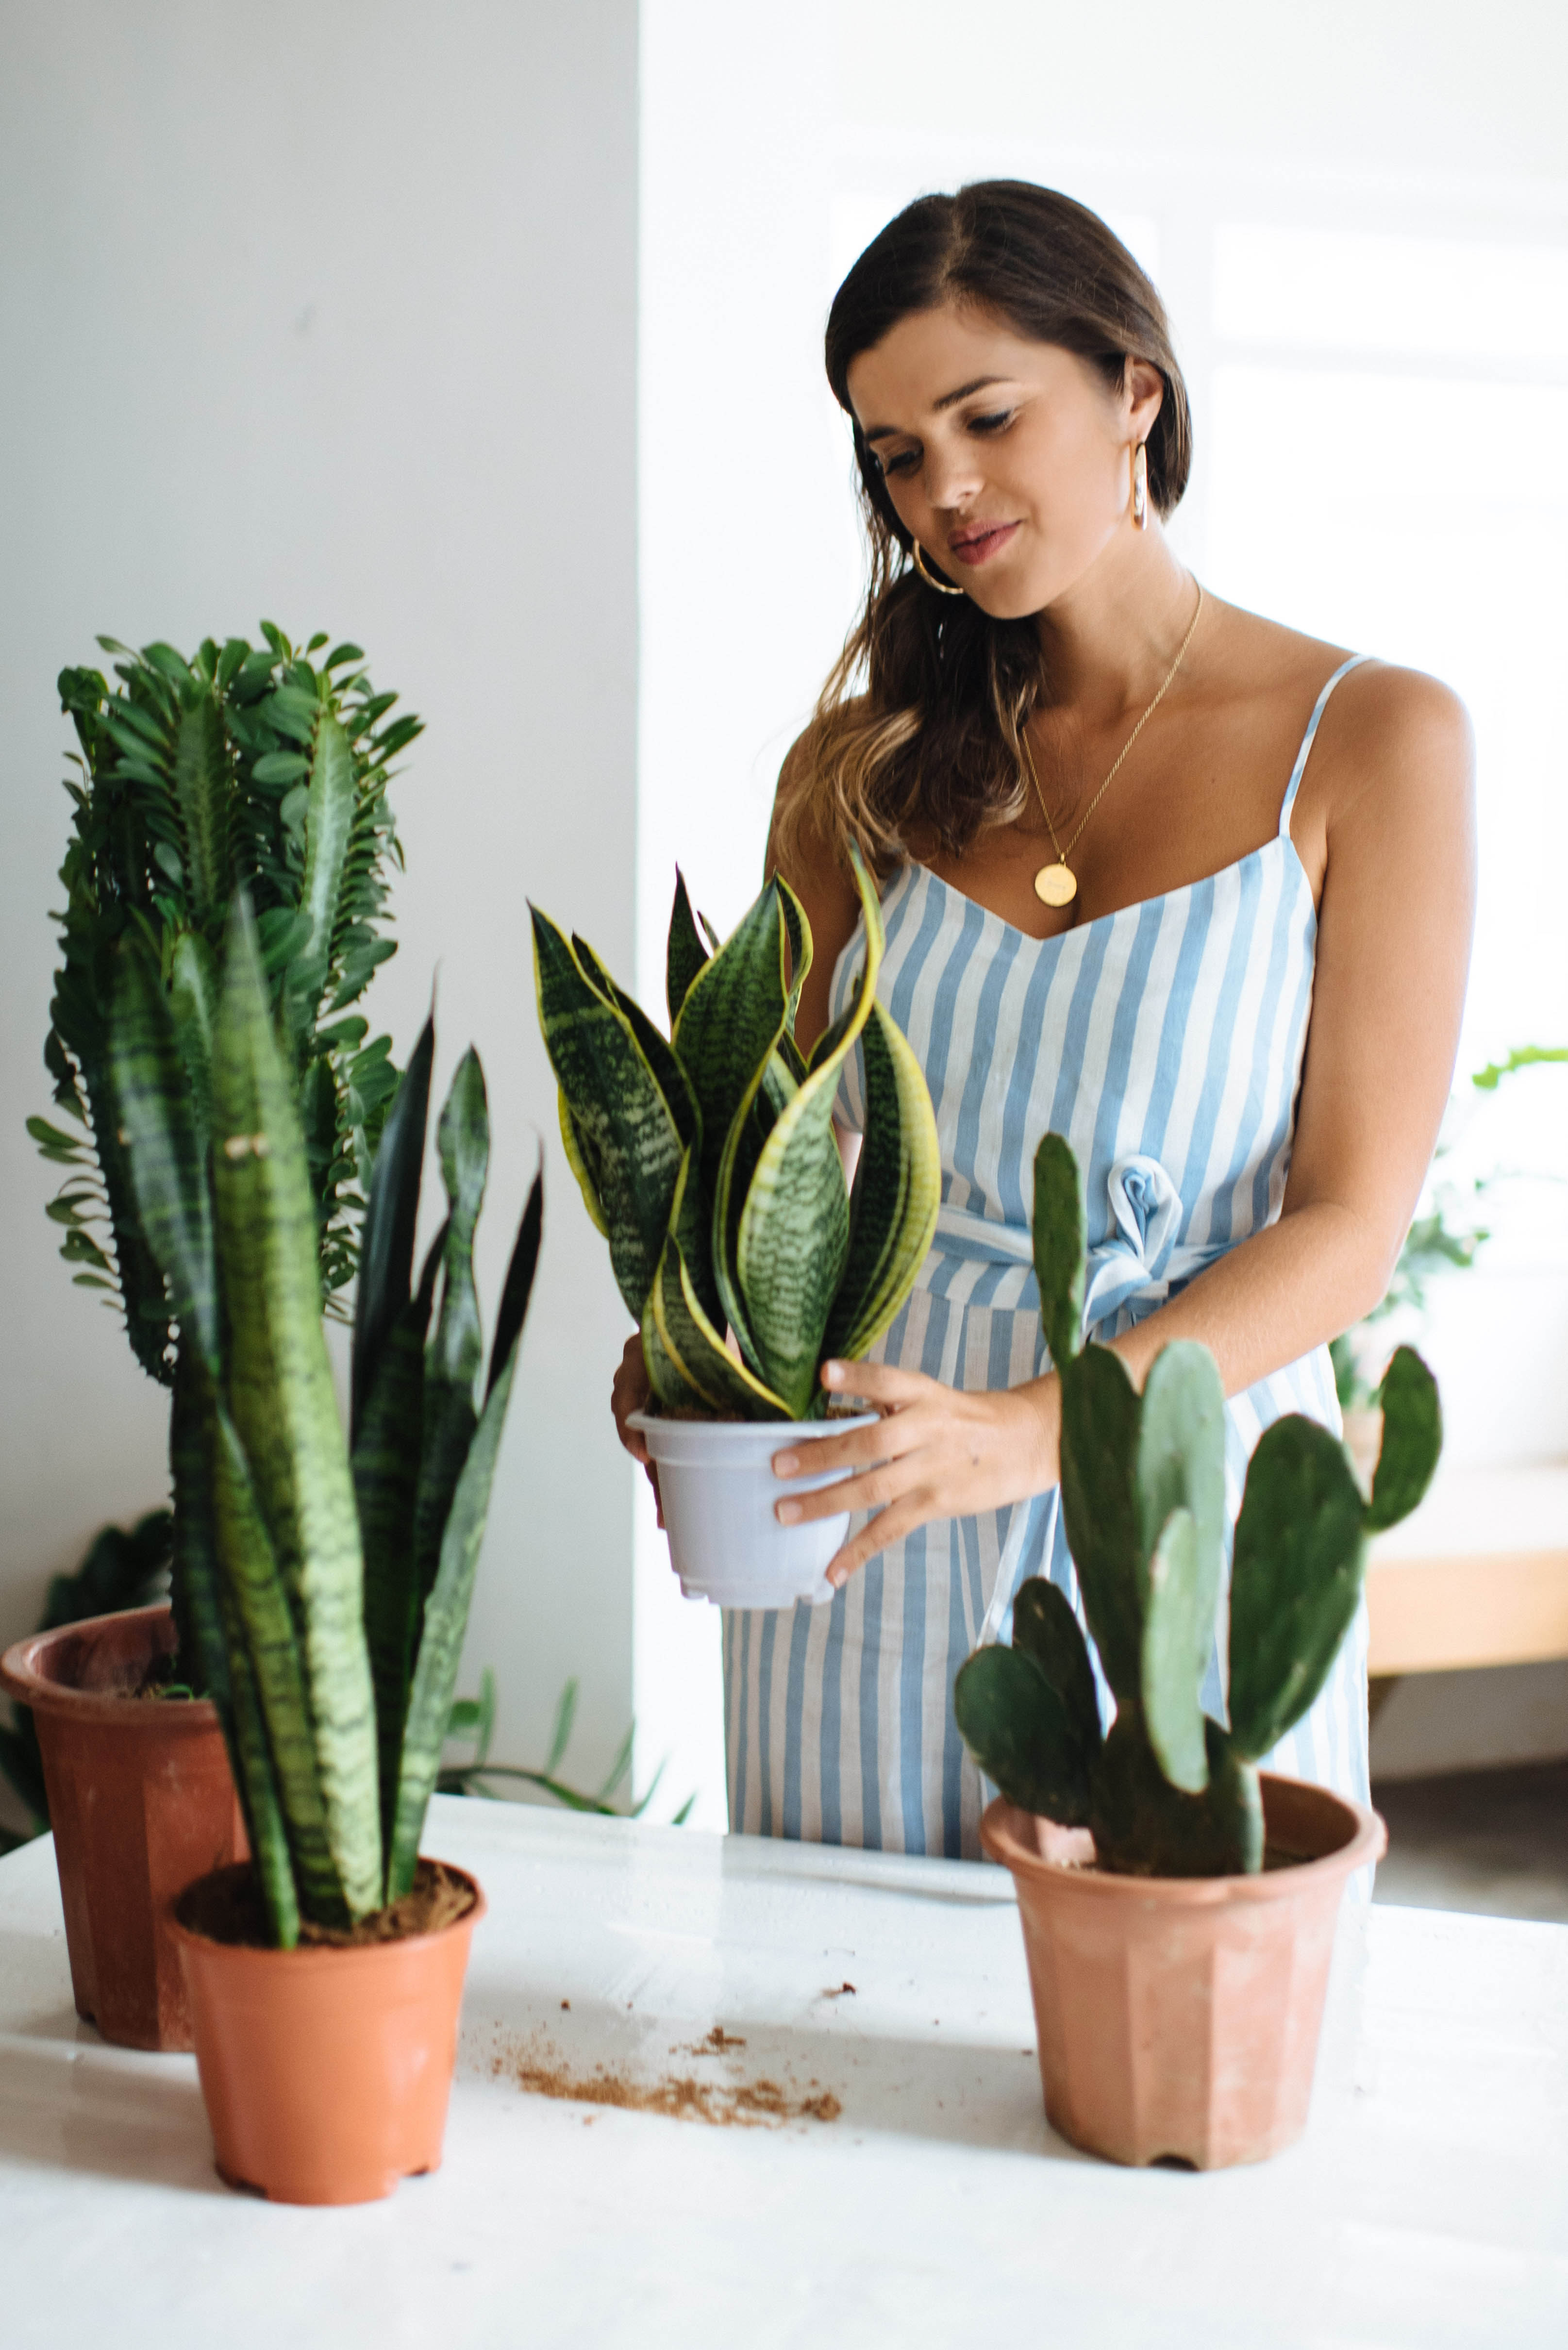 The Best Air Purifying Plants